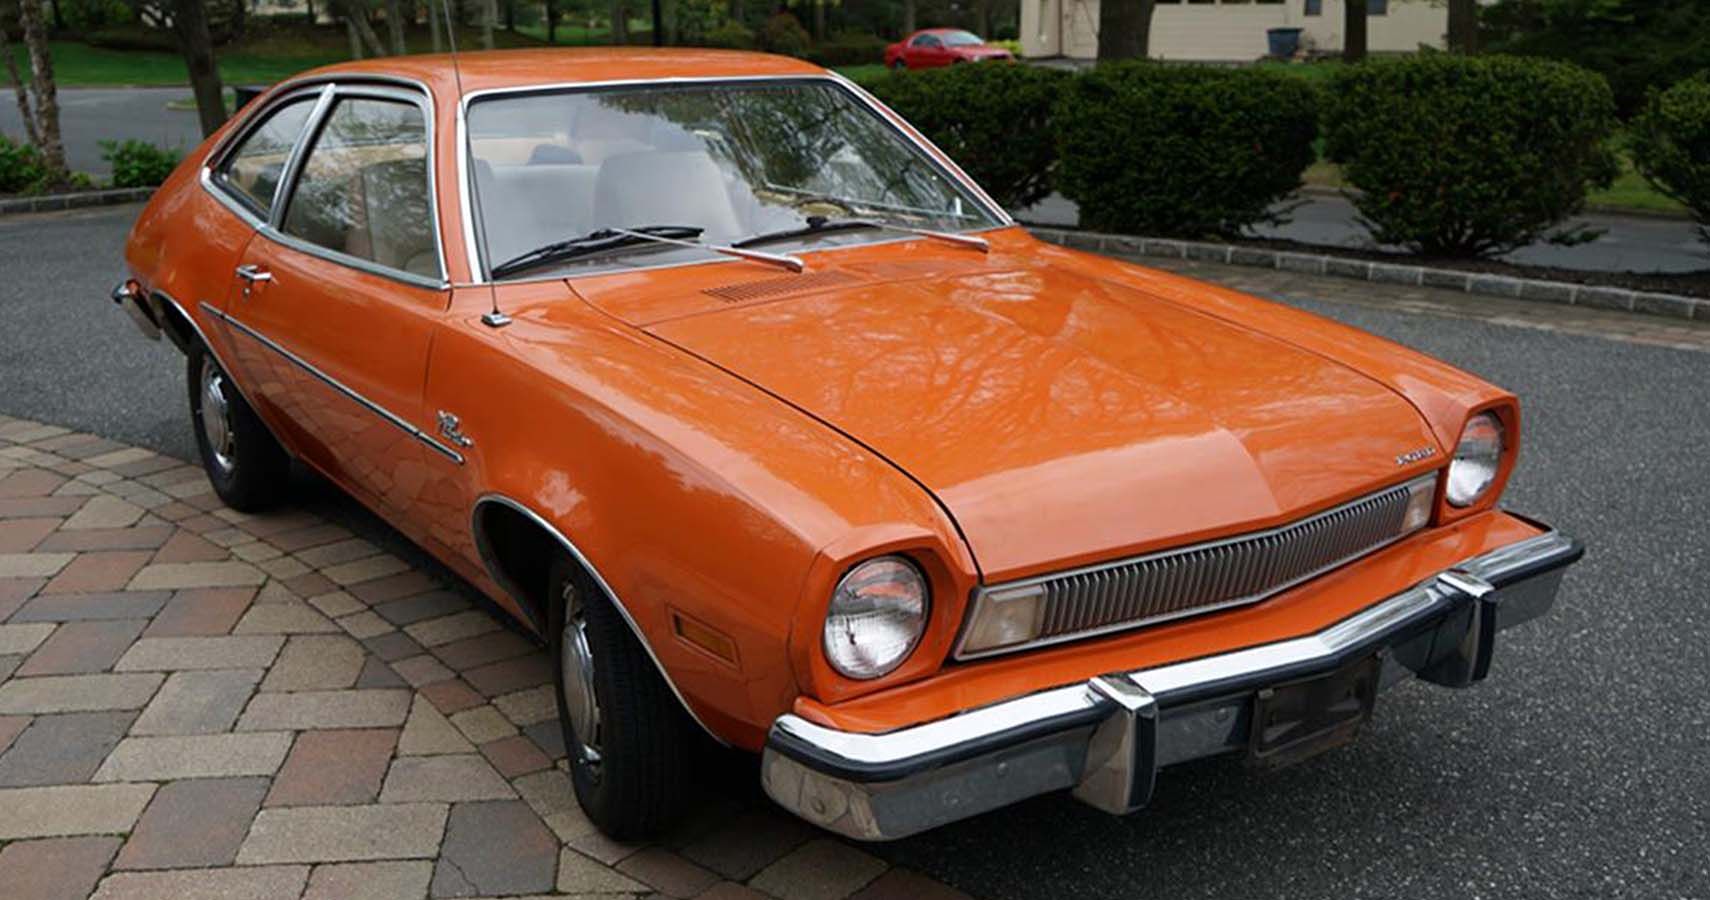 1974 Ford Pinto: The Kaboom Car